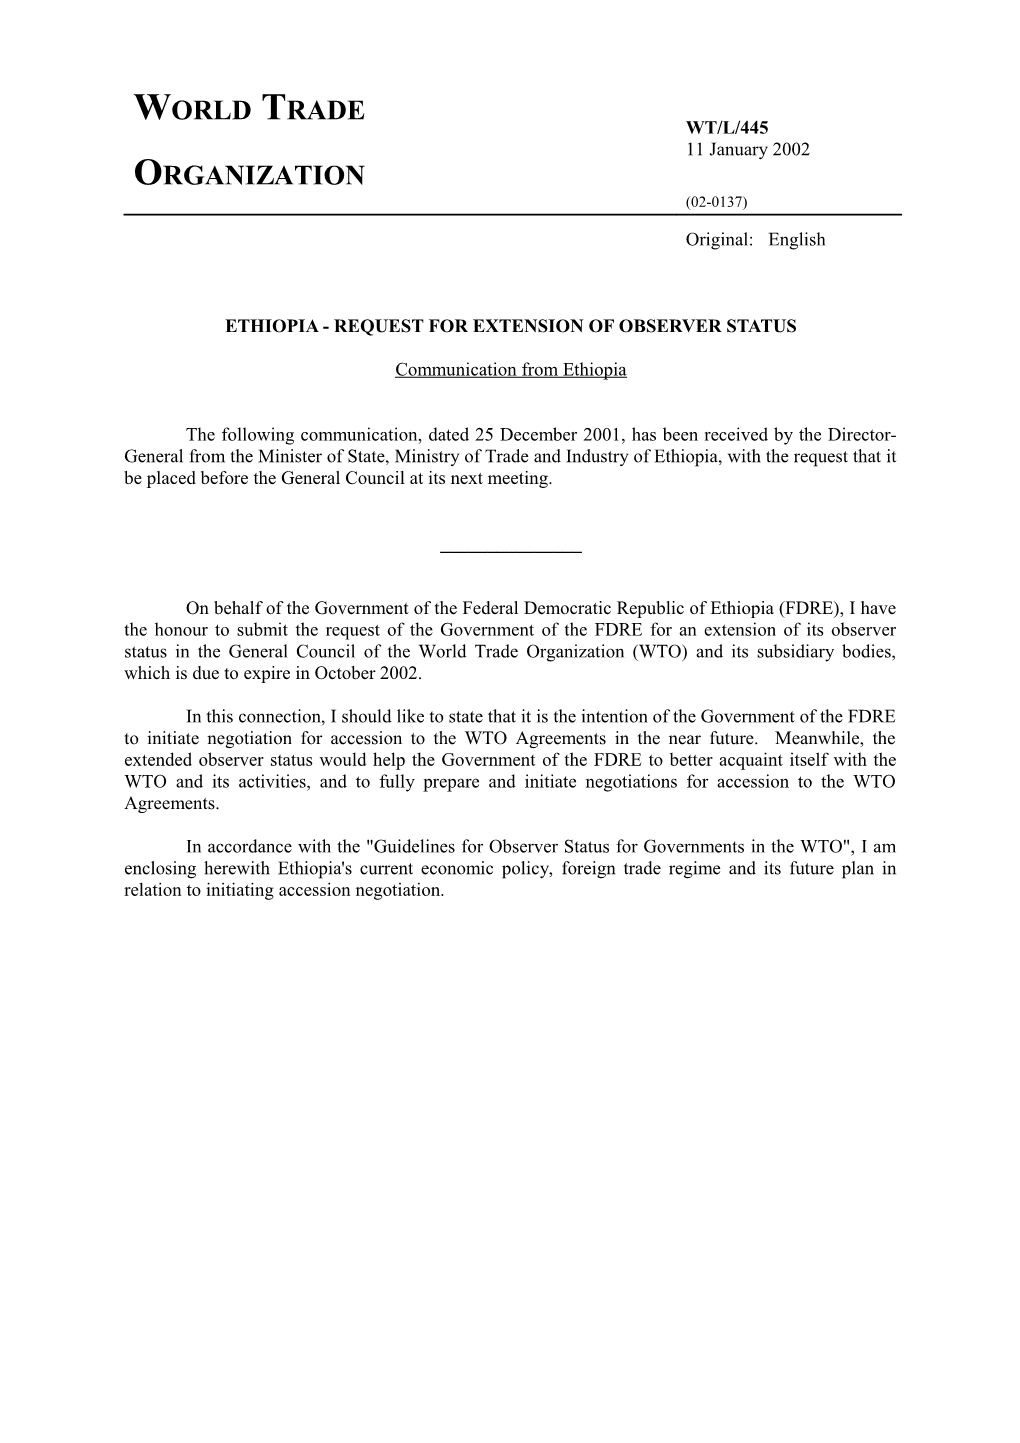 Ethiopia - Request for Extension of Observer Status